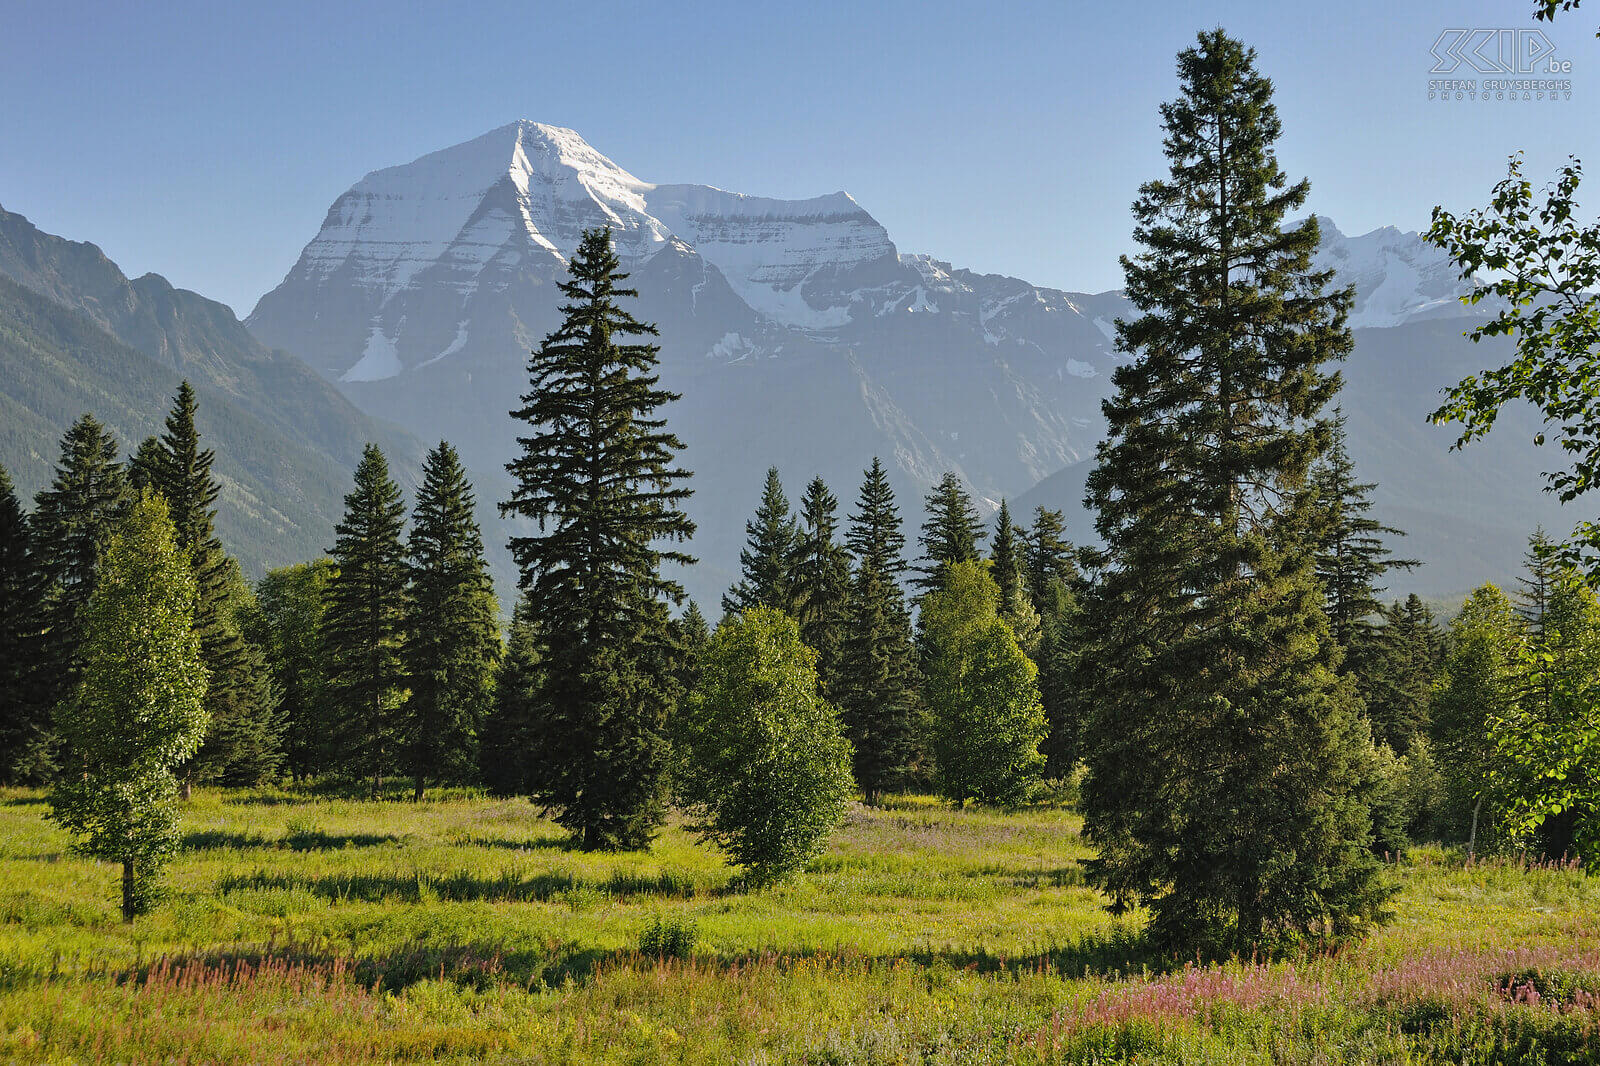 Mount Robson Mount Robson (3800m) is highest mountain in the Rocky Mountains. Stefan Cruysberghs